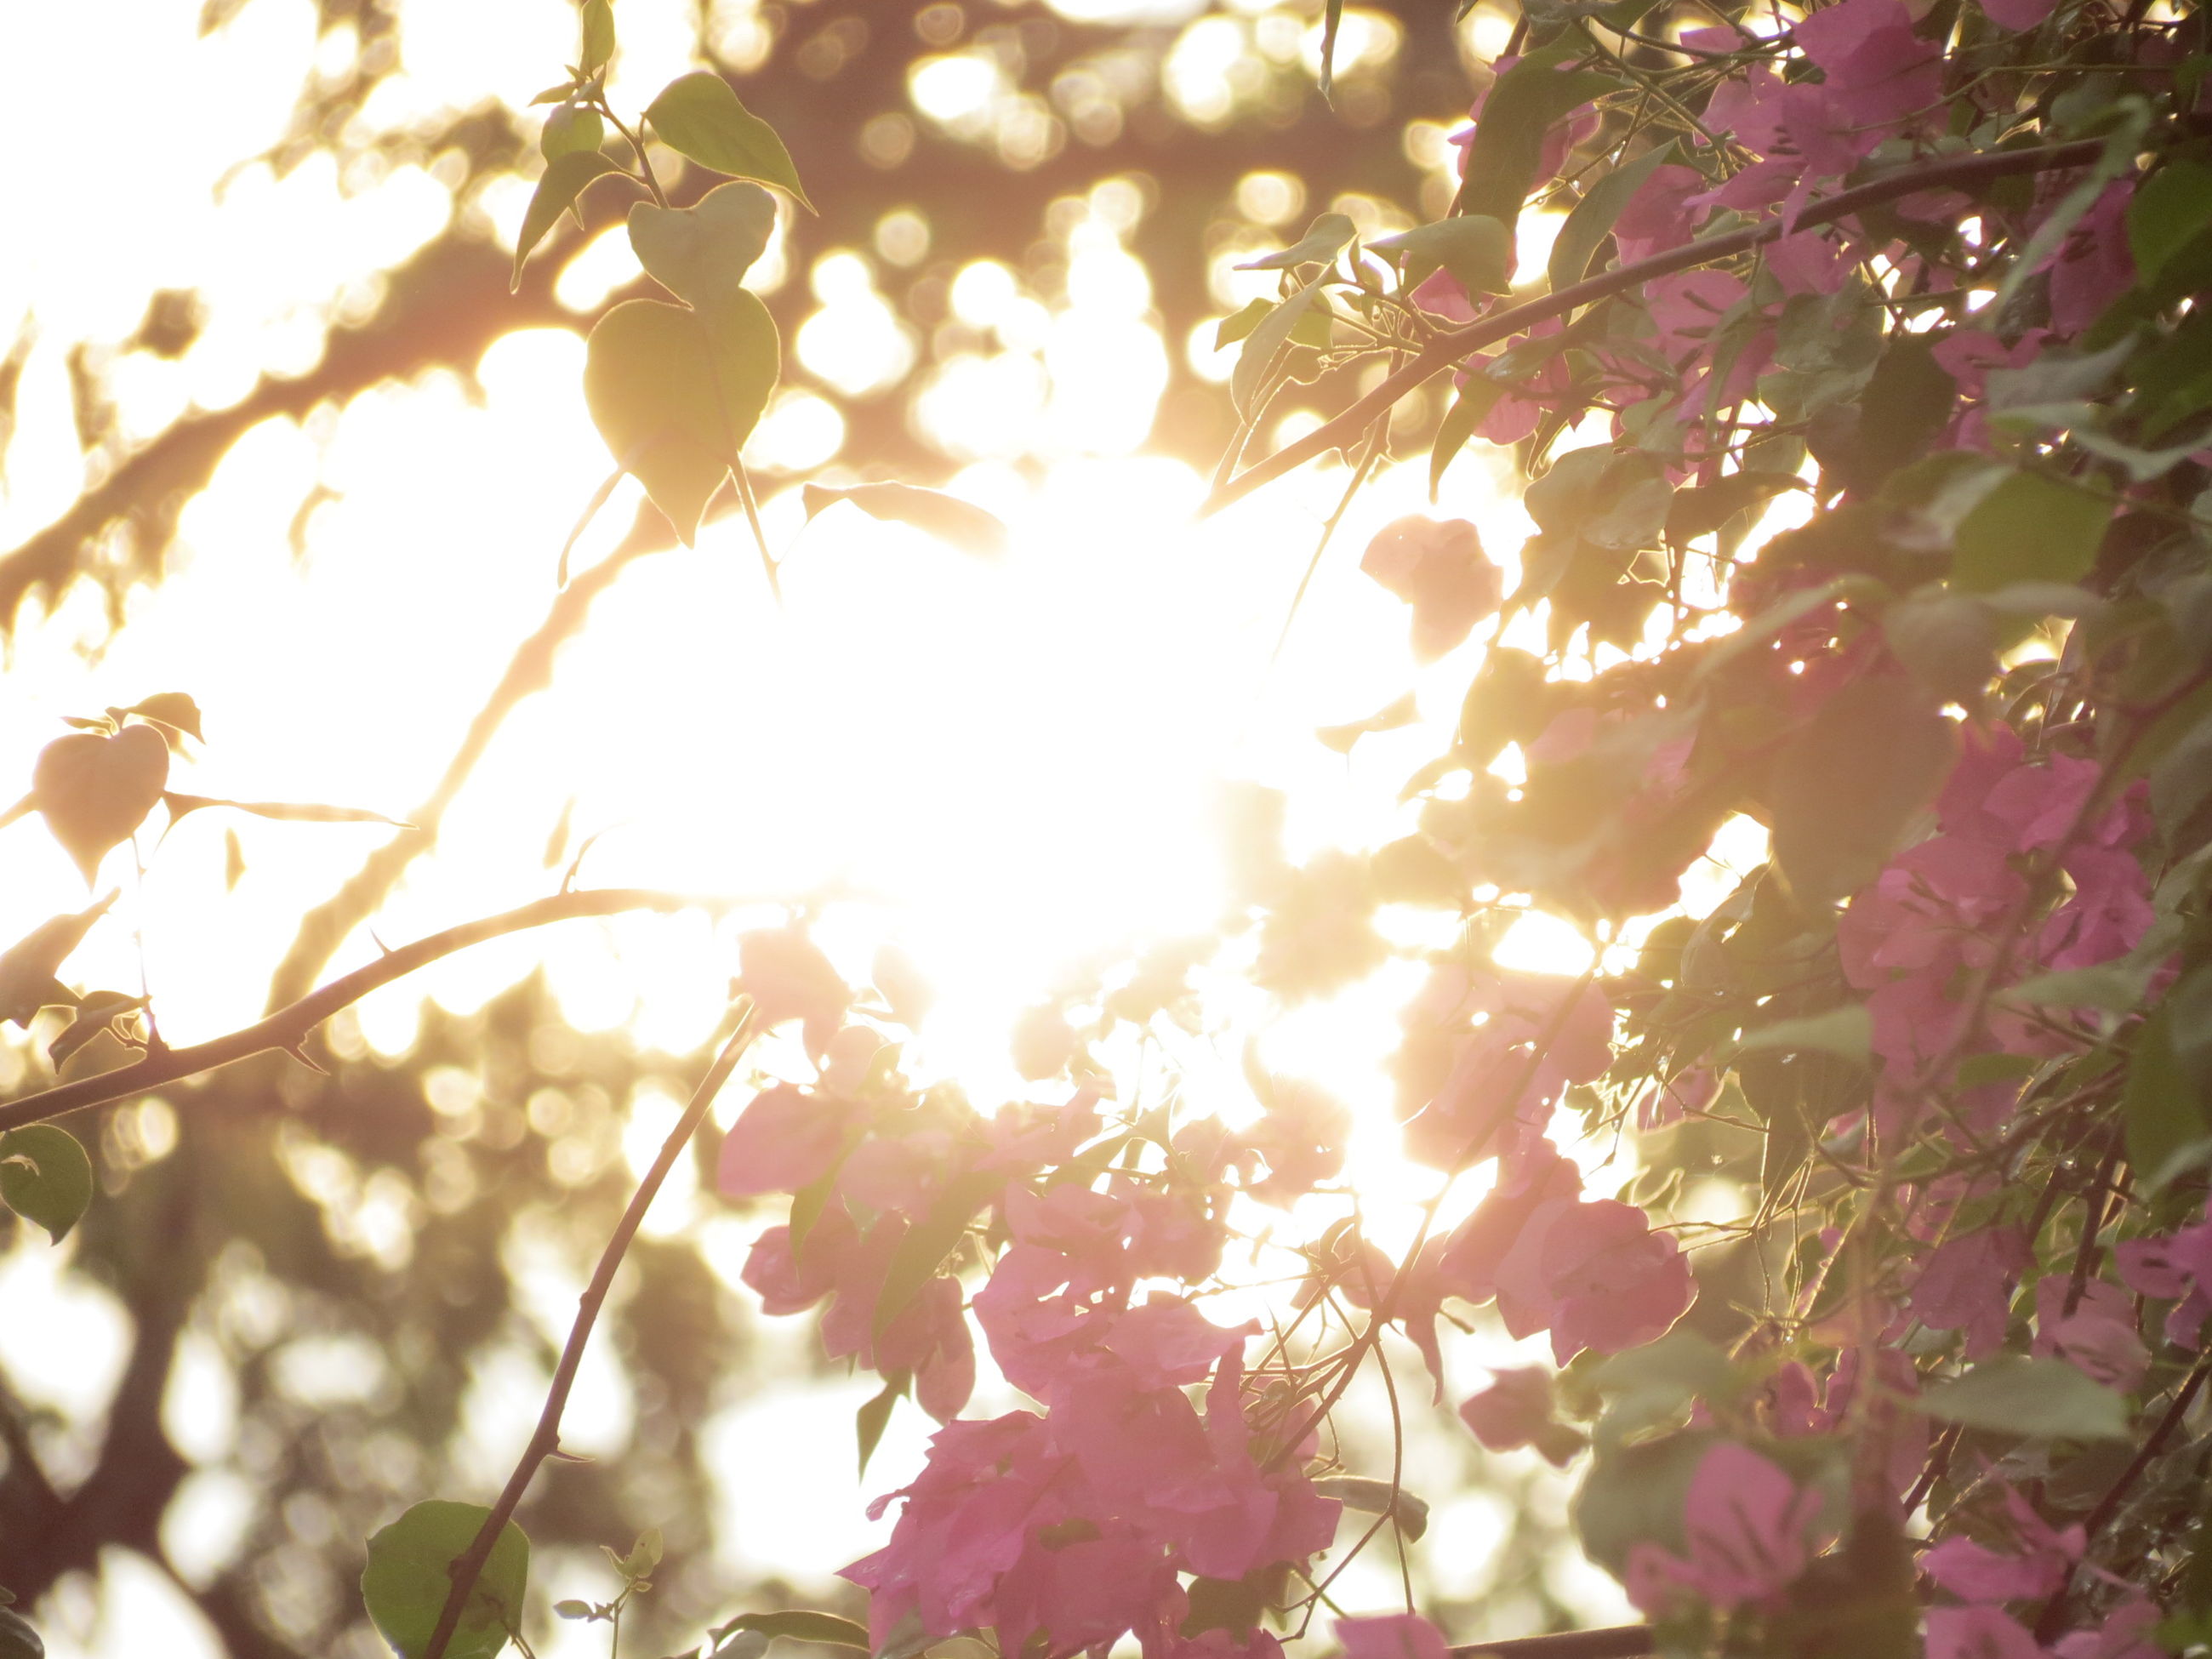 tree, branch, low angle view, growth, nature, beauty in nature, leaf, sun, sunlight, focus on foreground, close-up, freshness, lens flare, sunbeam, flower, outdoors, tranquility, day, fragility, twig